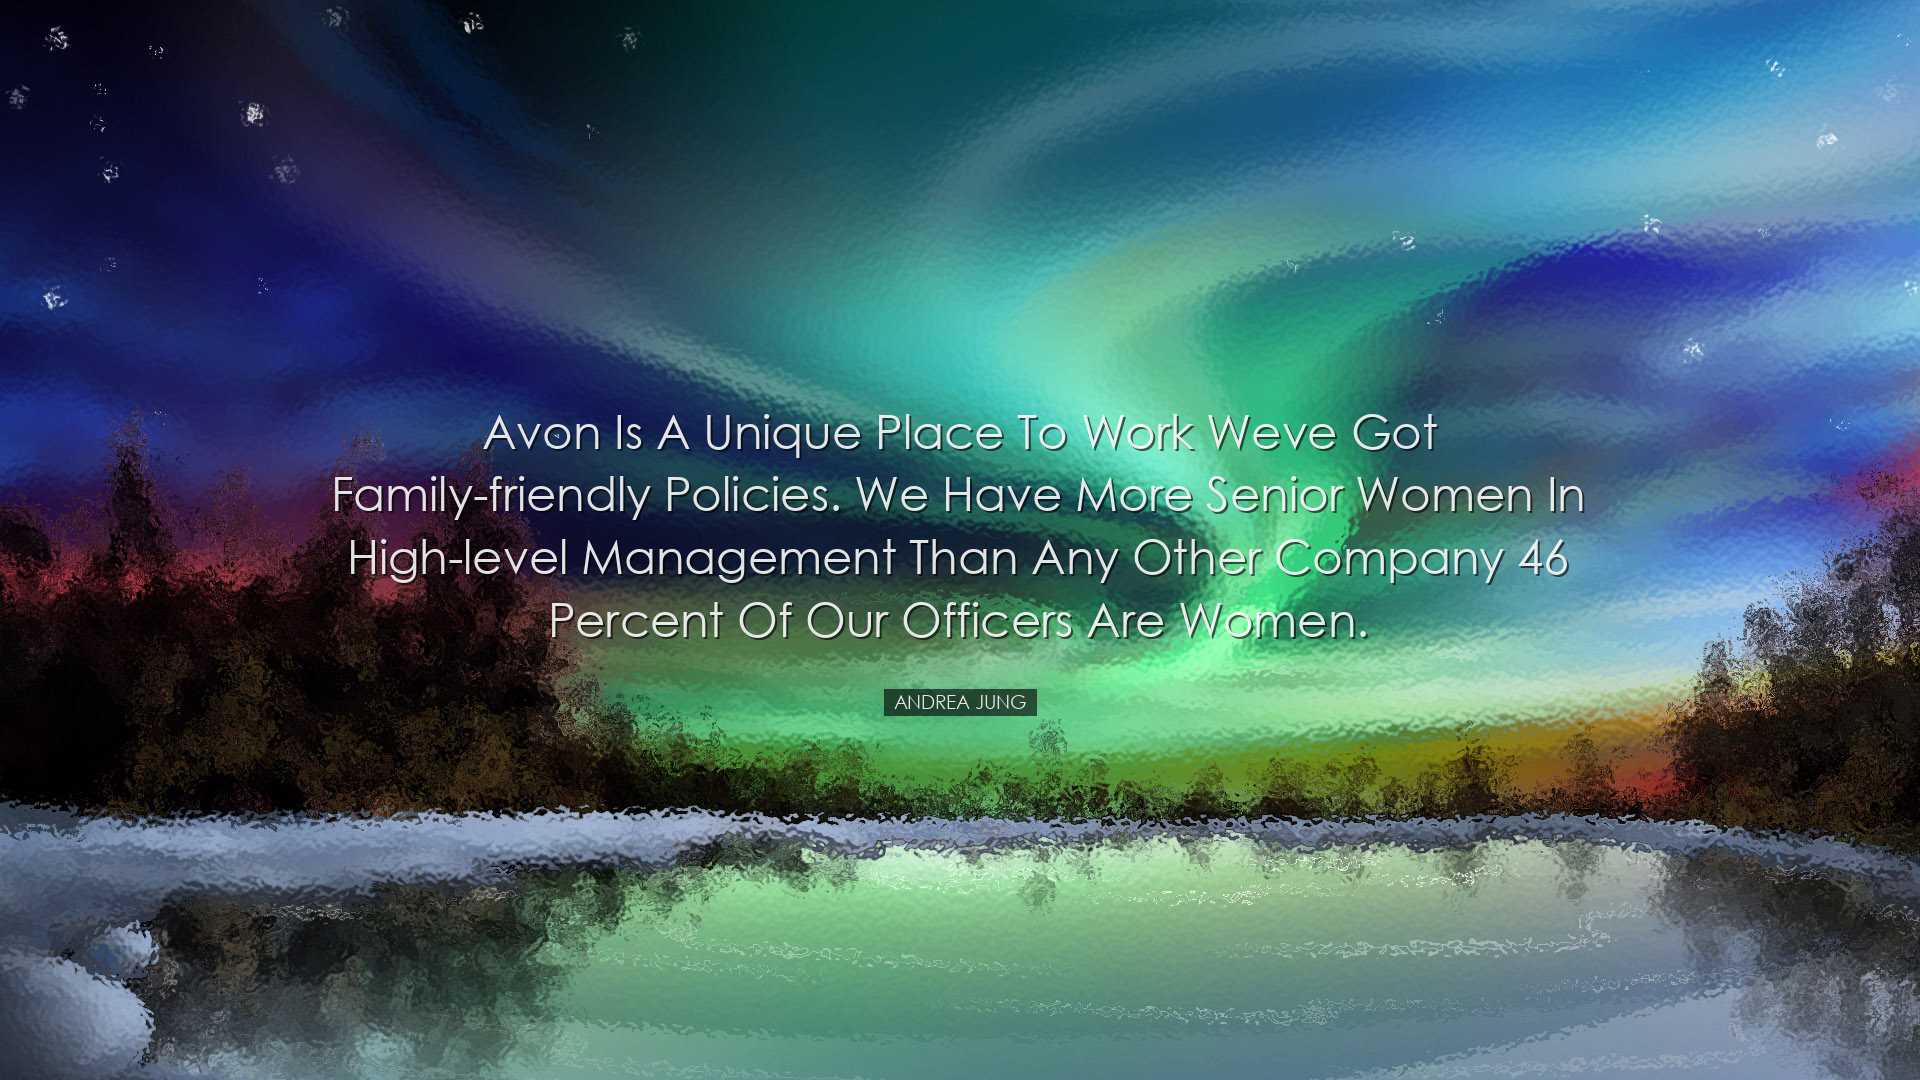 Avon is a unique place to work weve got family-friendly policies.